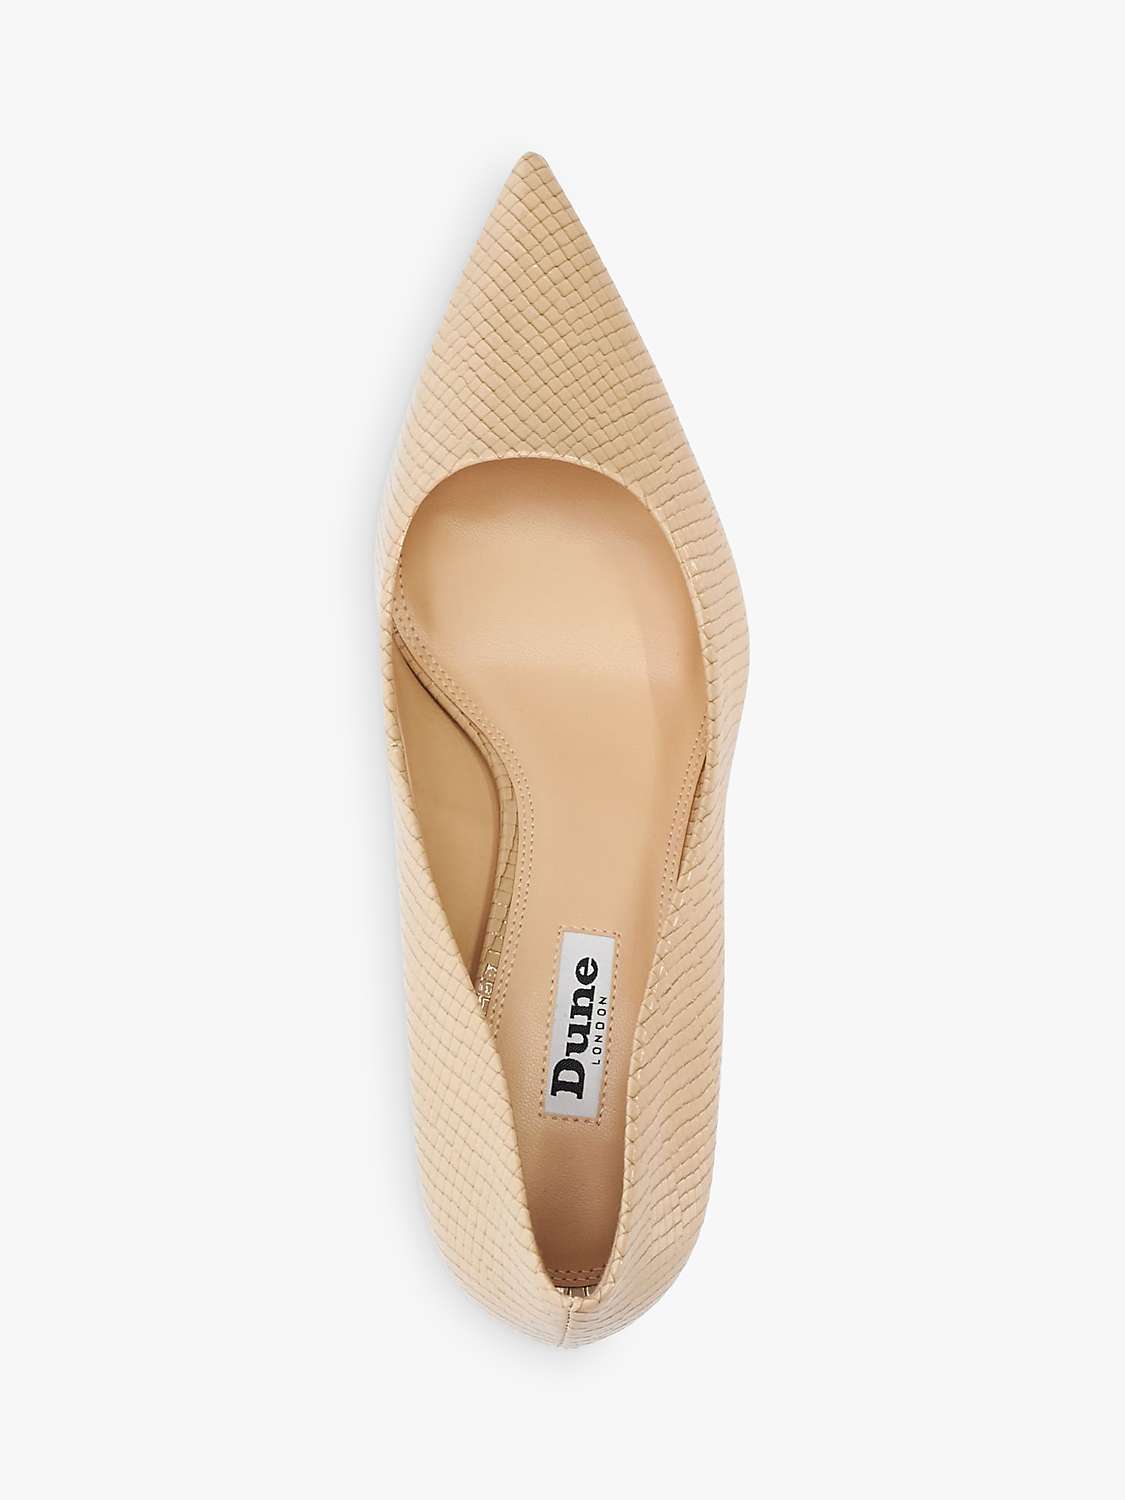 Buy Dune Absolute Reptile Mid Heel Court Shoes, Blush Online at johnlewis.com